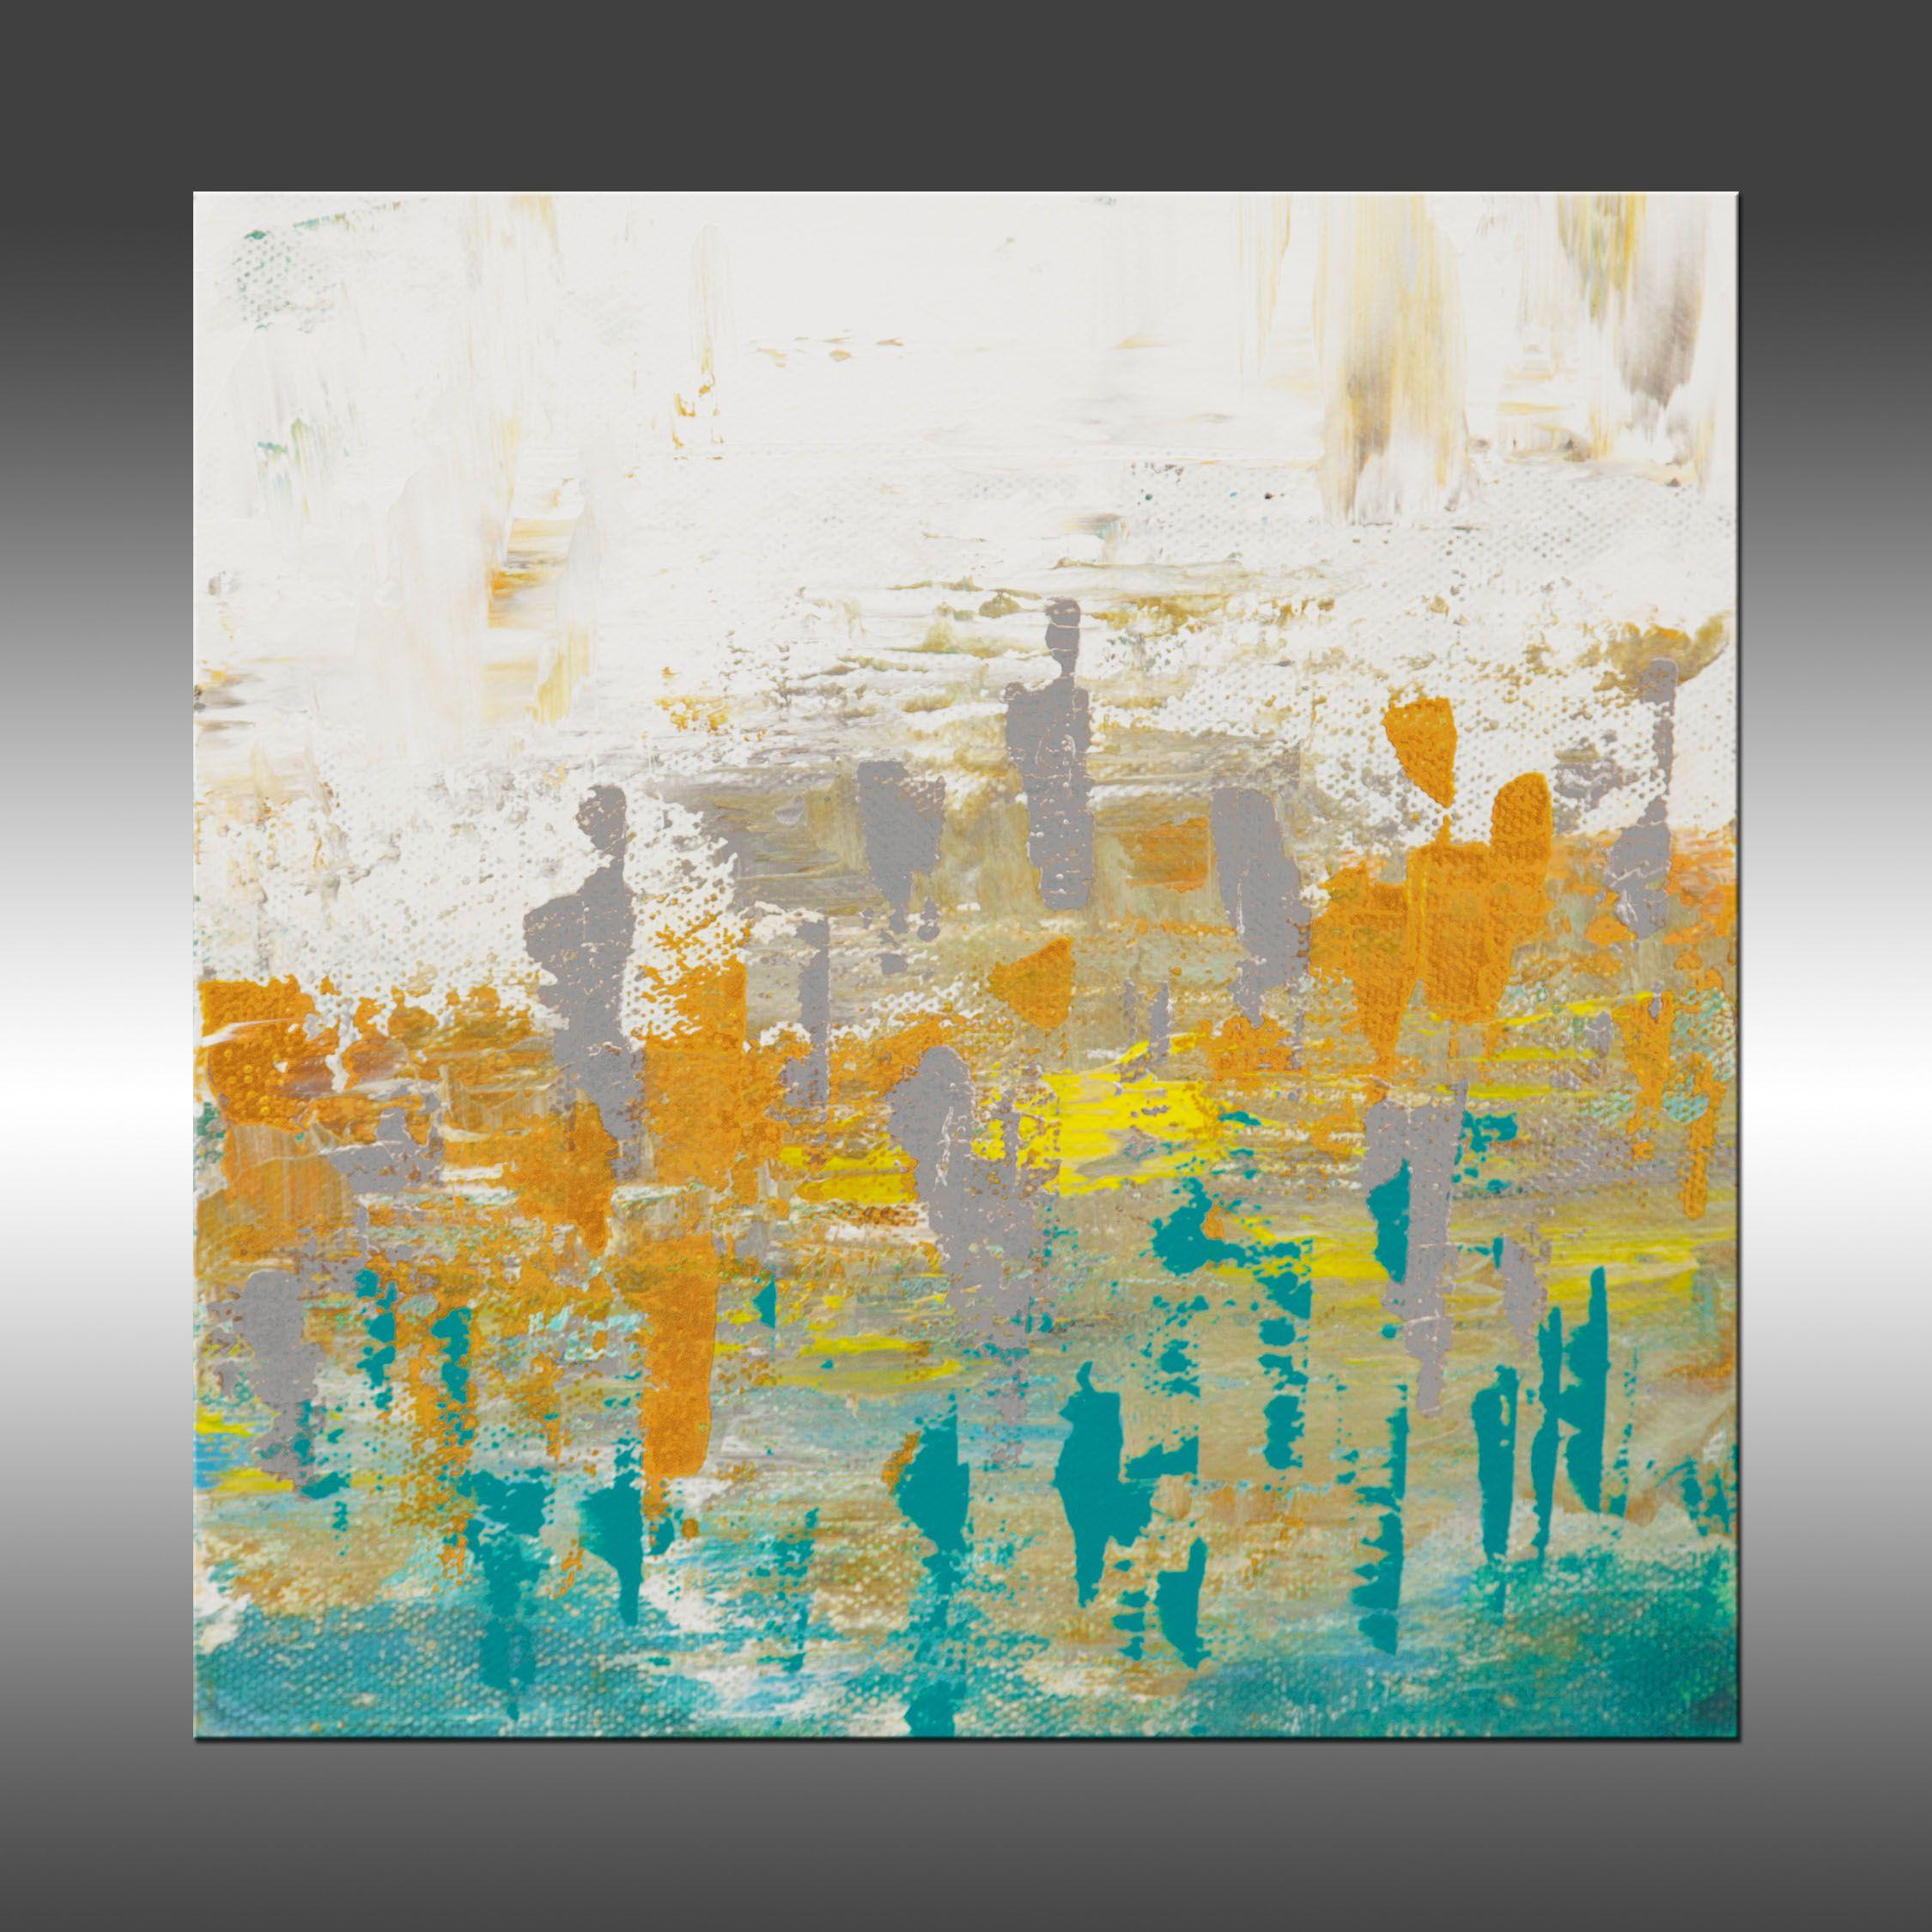 Ascension 10 is an original painting, created with acrylic paint on gallery-wrapped canvas. It has a width of 8 inches and a height of 8 inches with a depth of 1.5 inches (8x8x1.5).    The colors used in the painting are teal, taupe, white, yellow,